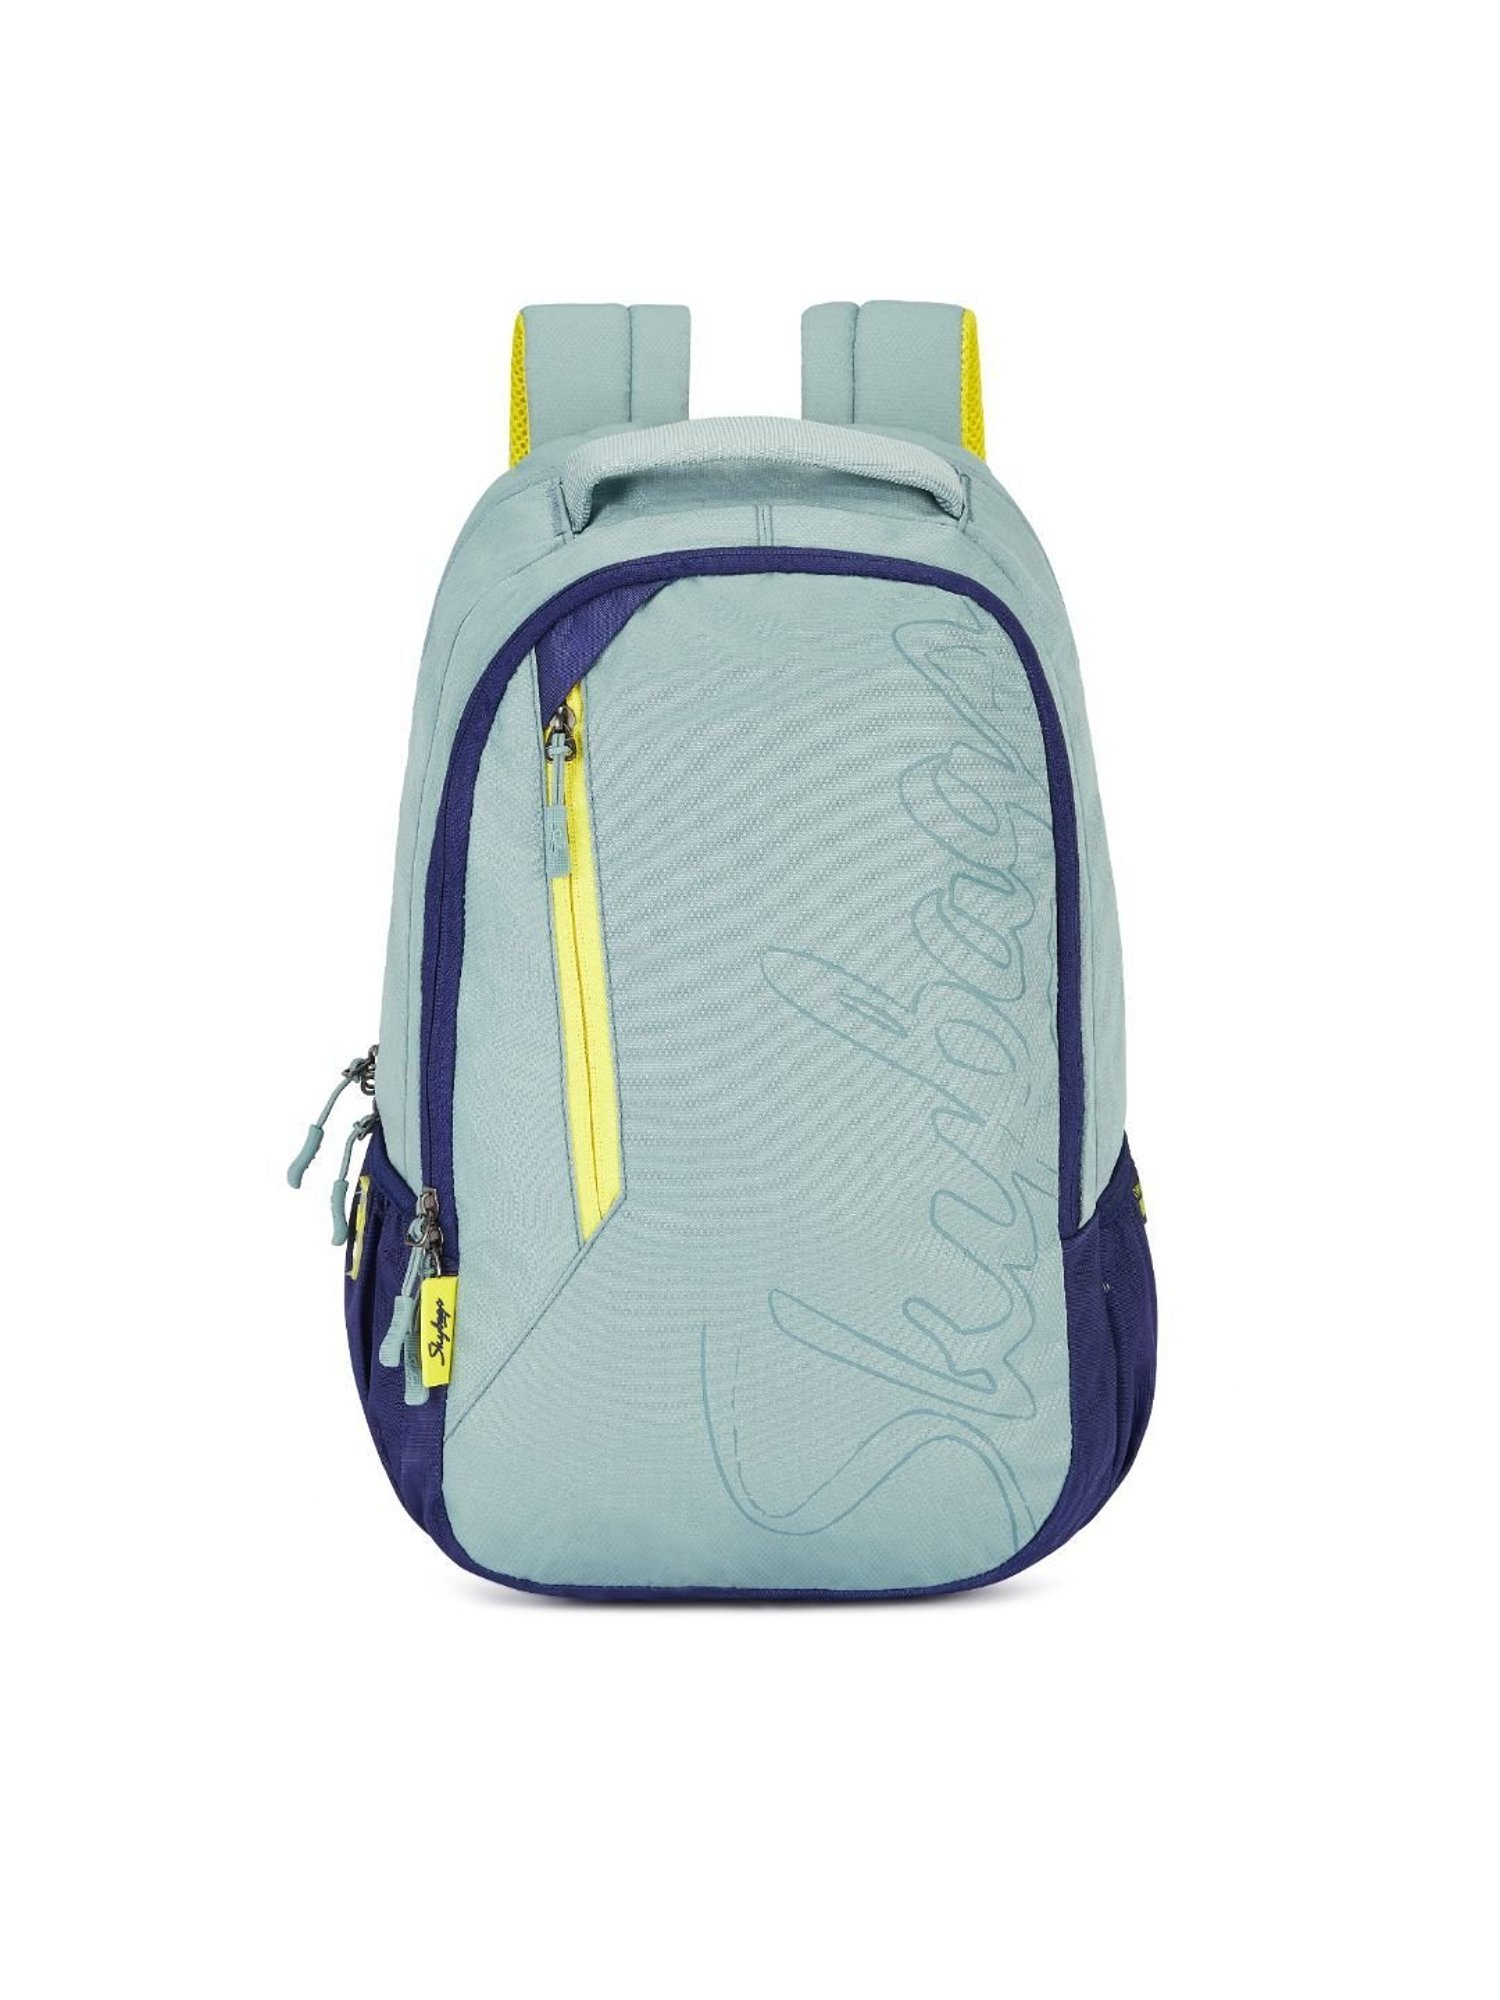 Buy Skybags Hd Polyester Multicolour Backpack ,25 Litres Online - Backpacks  - Backpacks - Discontinued - Pepperfry Product